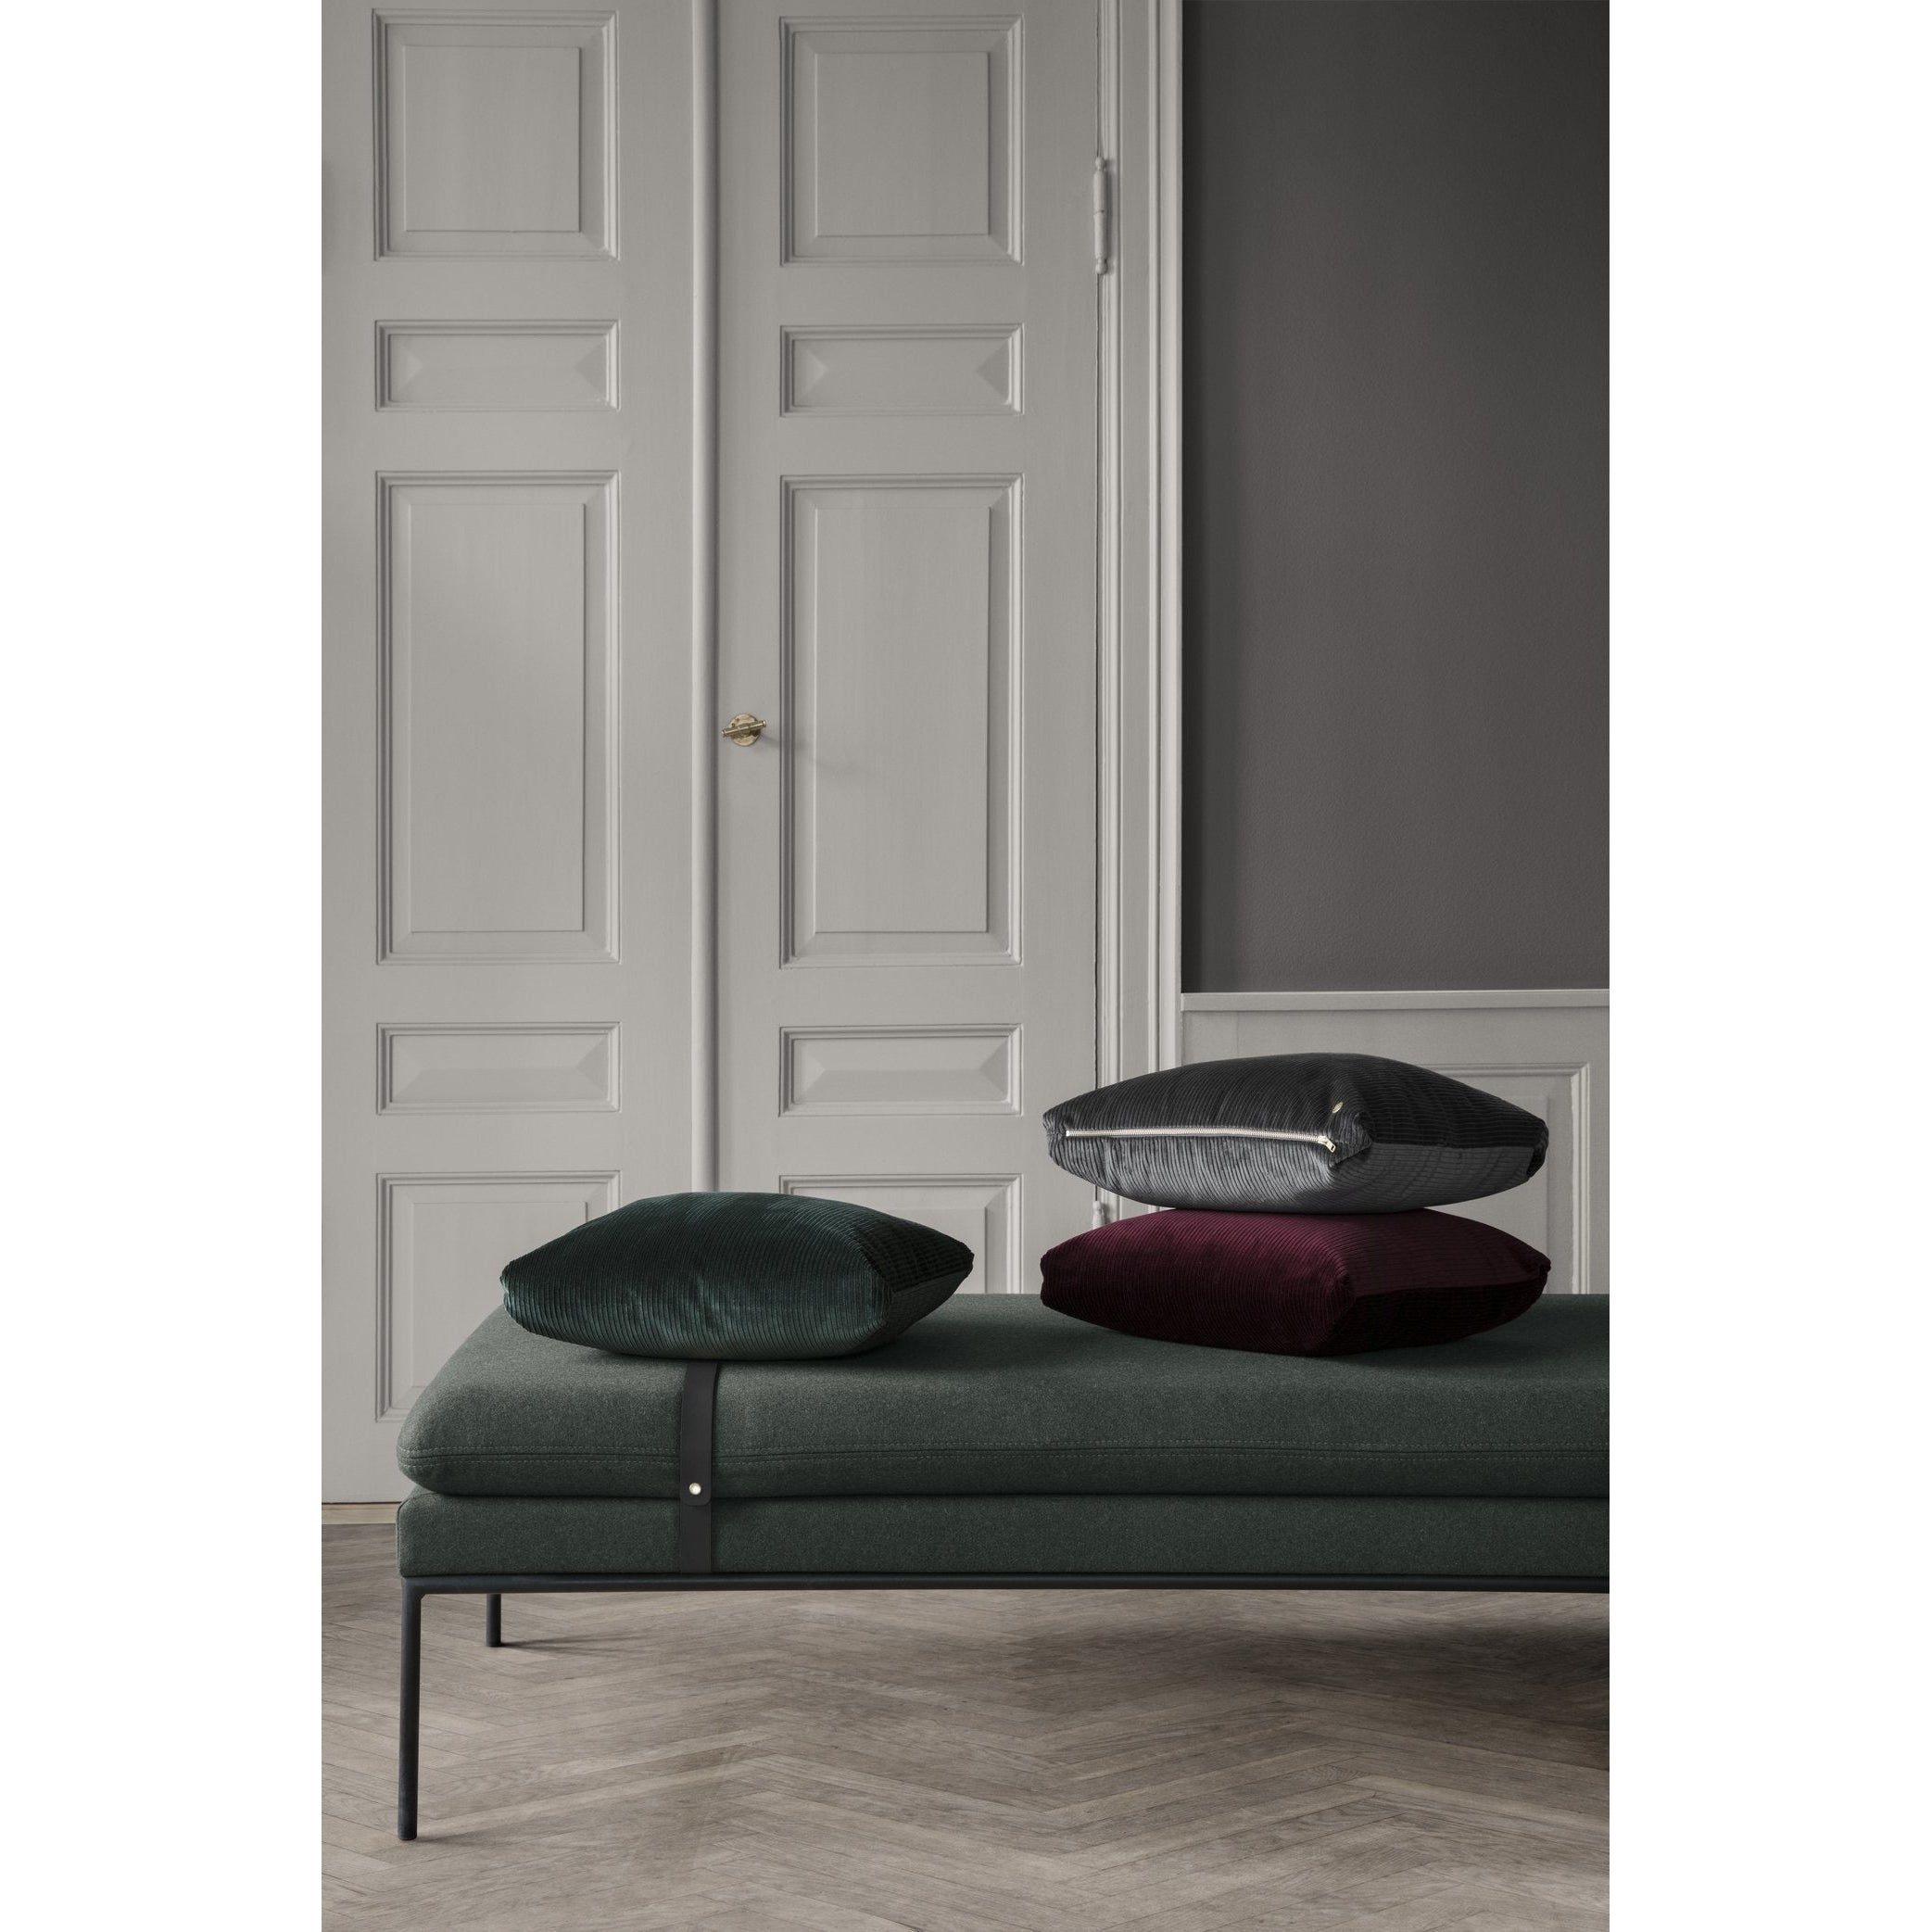 Ferm Living Turn Day Bed Fiord, massief donkergroen